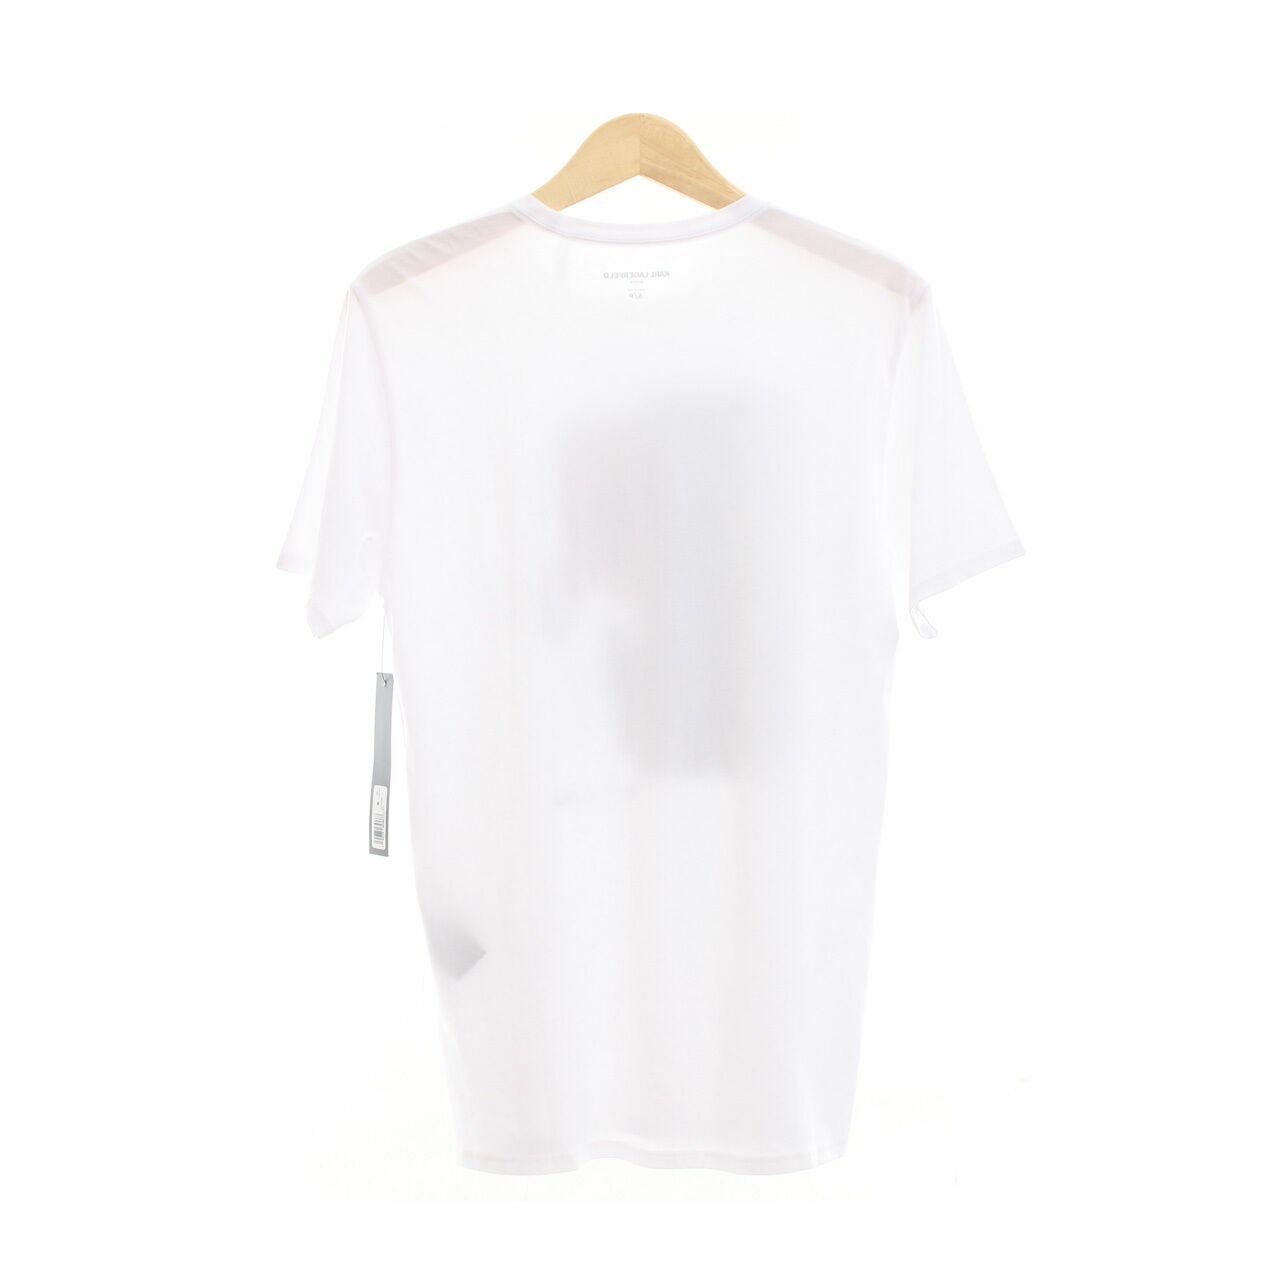 Karl Lagerfeld Split Personality Karl Character Cotton Graphic White T-shirt